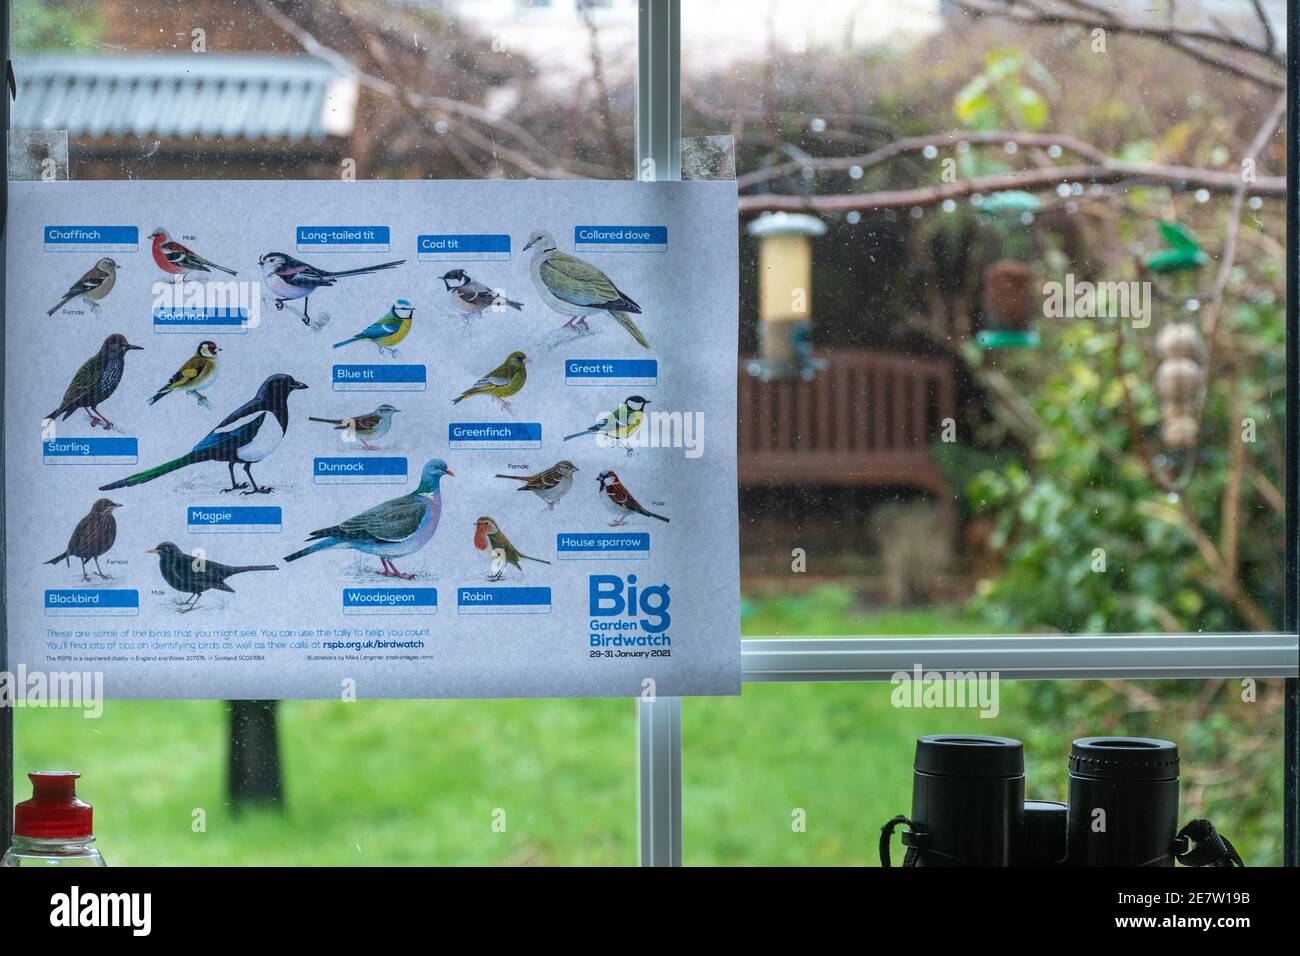 Taking part in the Big Garden Birdwatch with an RSPB bird ID (identification) chart in the kitchen window, UK, January 2021 Stock Photo